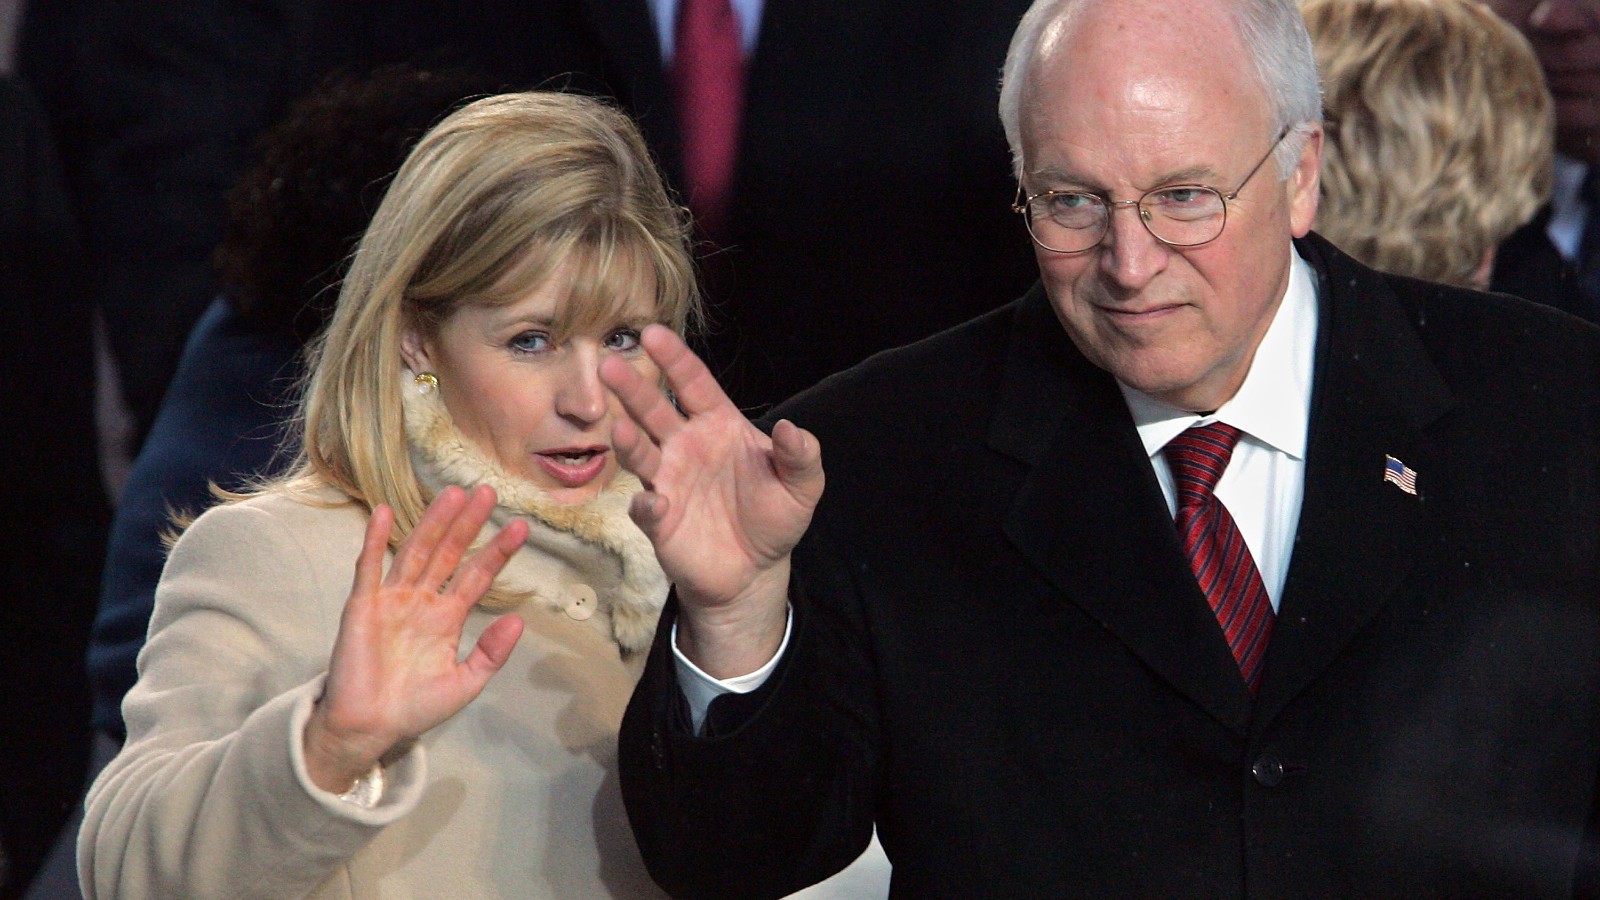 For Cheney, career in politics was pedigreed from an early age: 'It's in my blood'